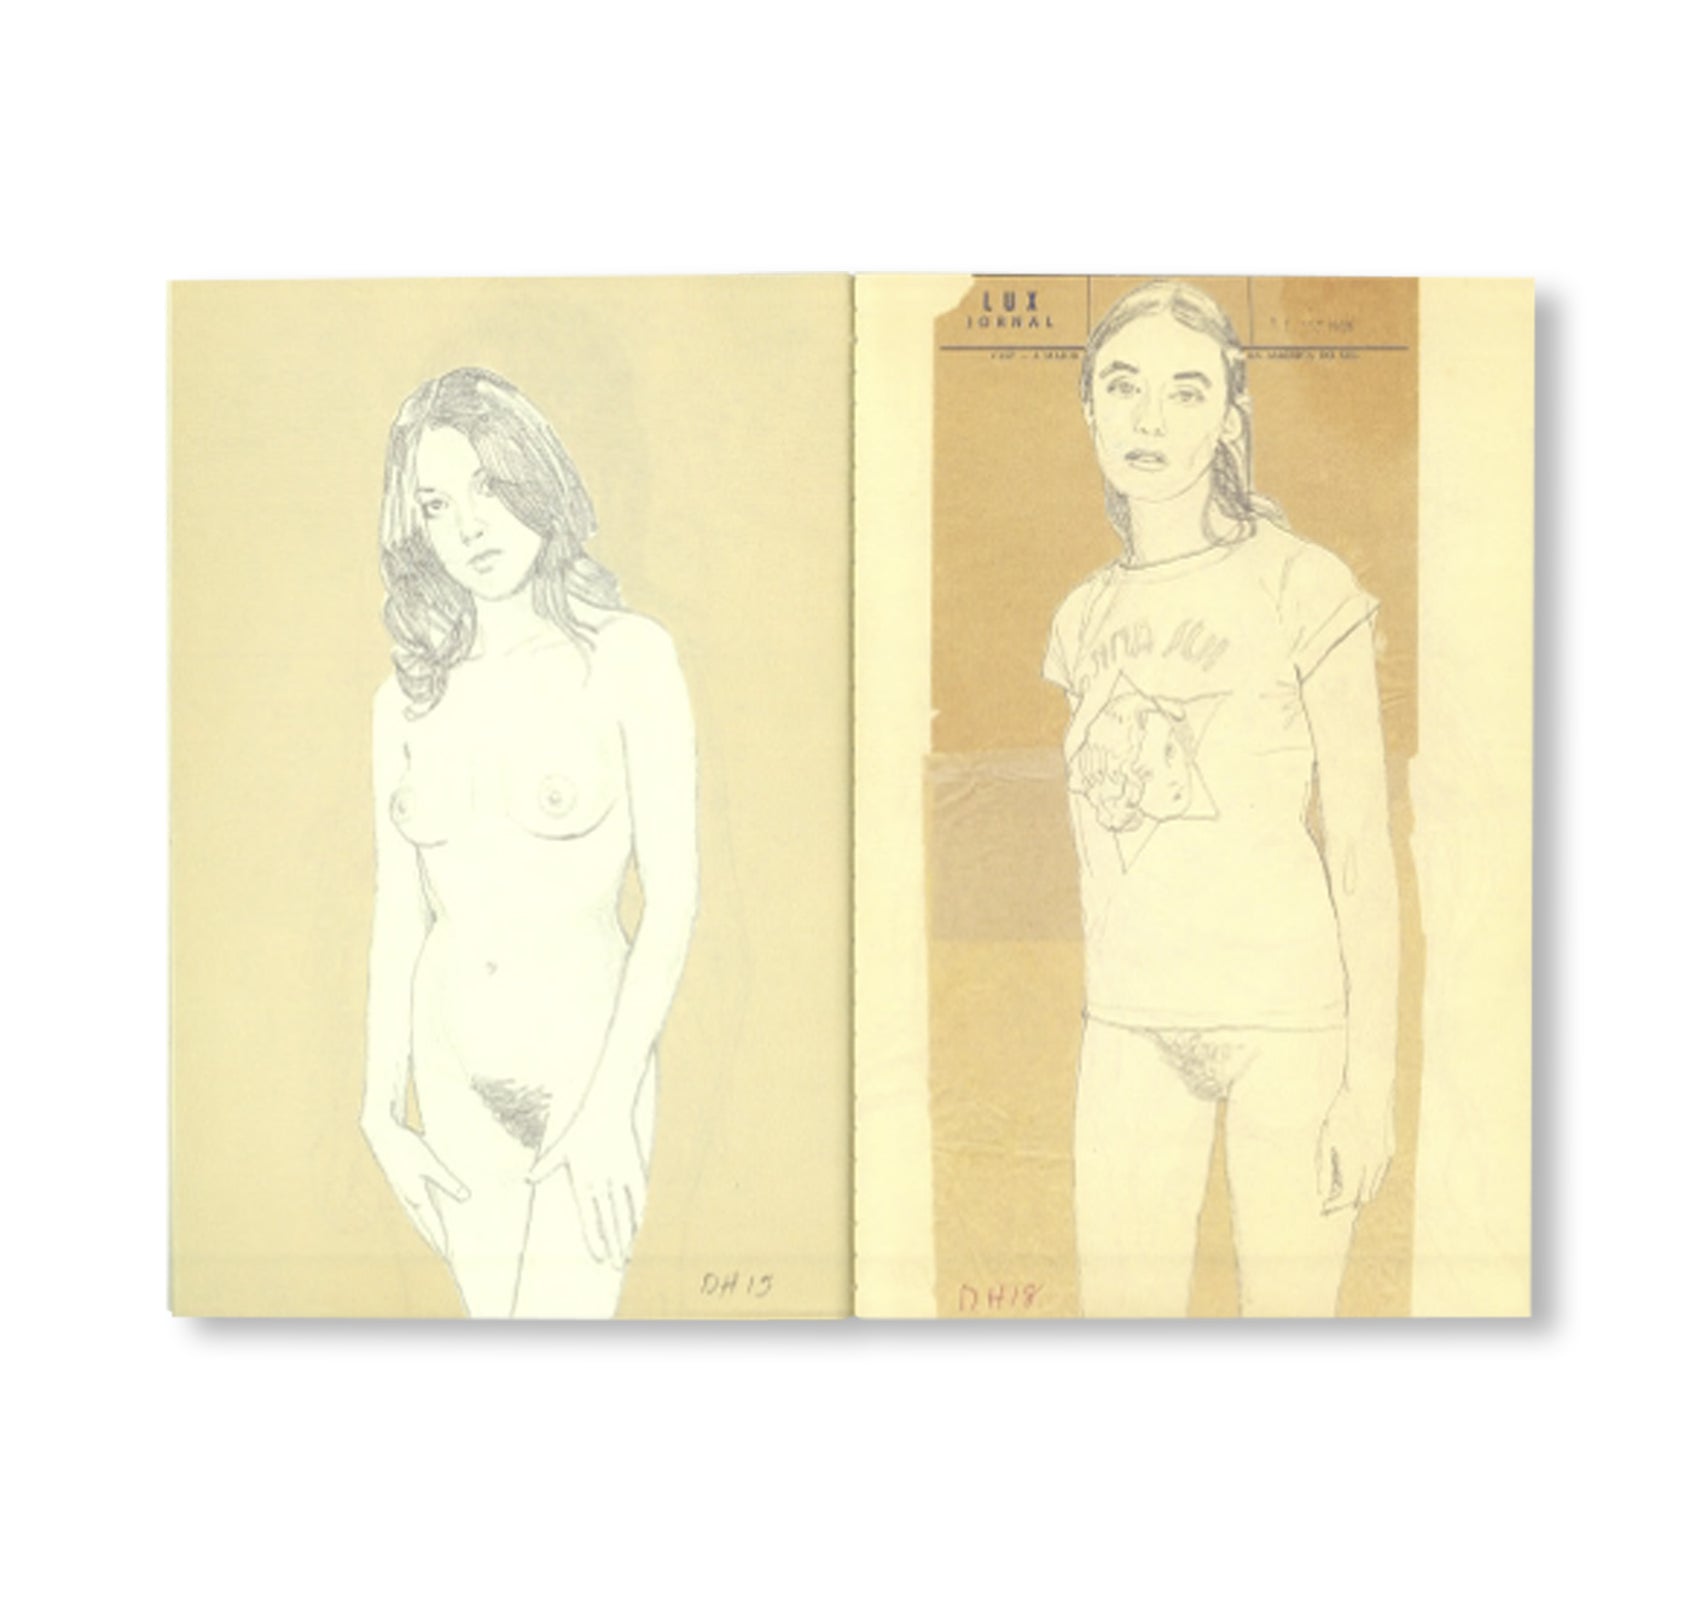 STUDIES OF THE FEMALE FORM by Duncan Hannah